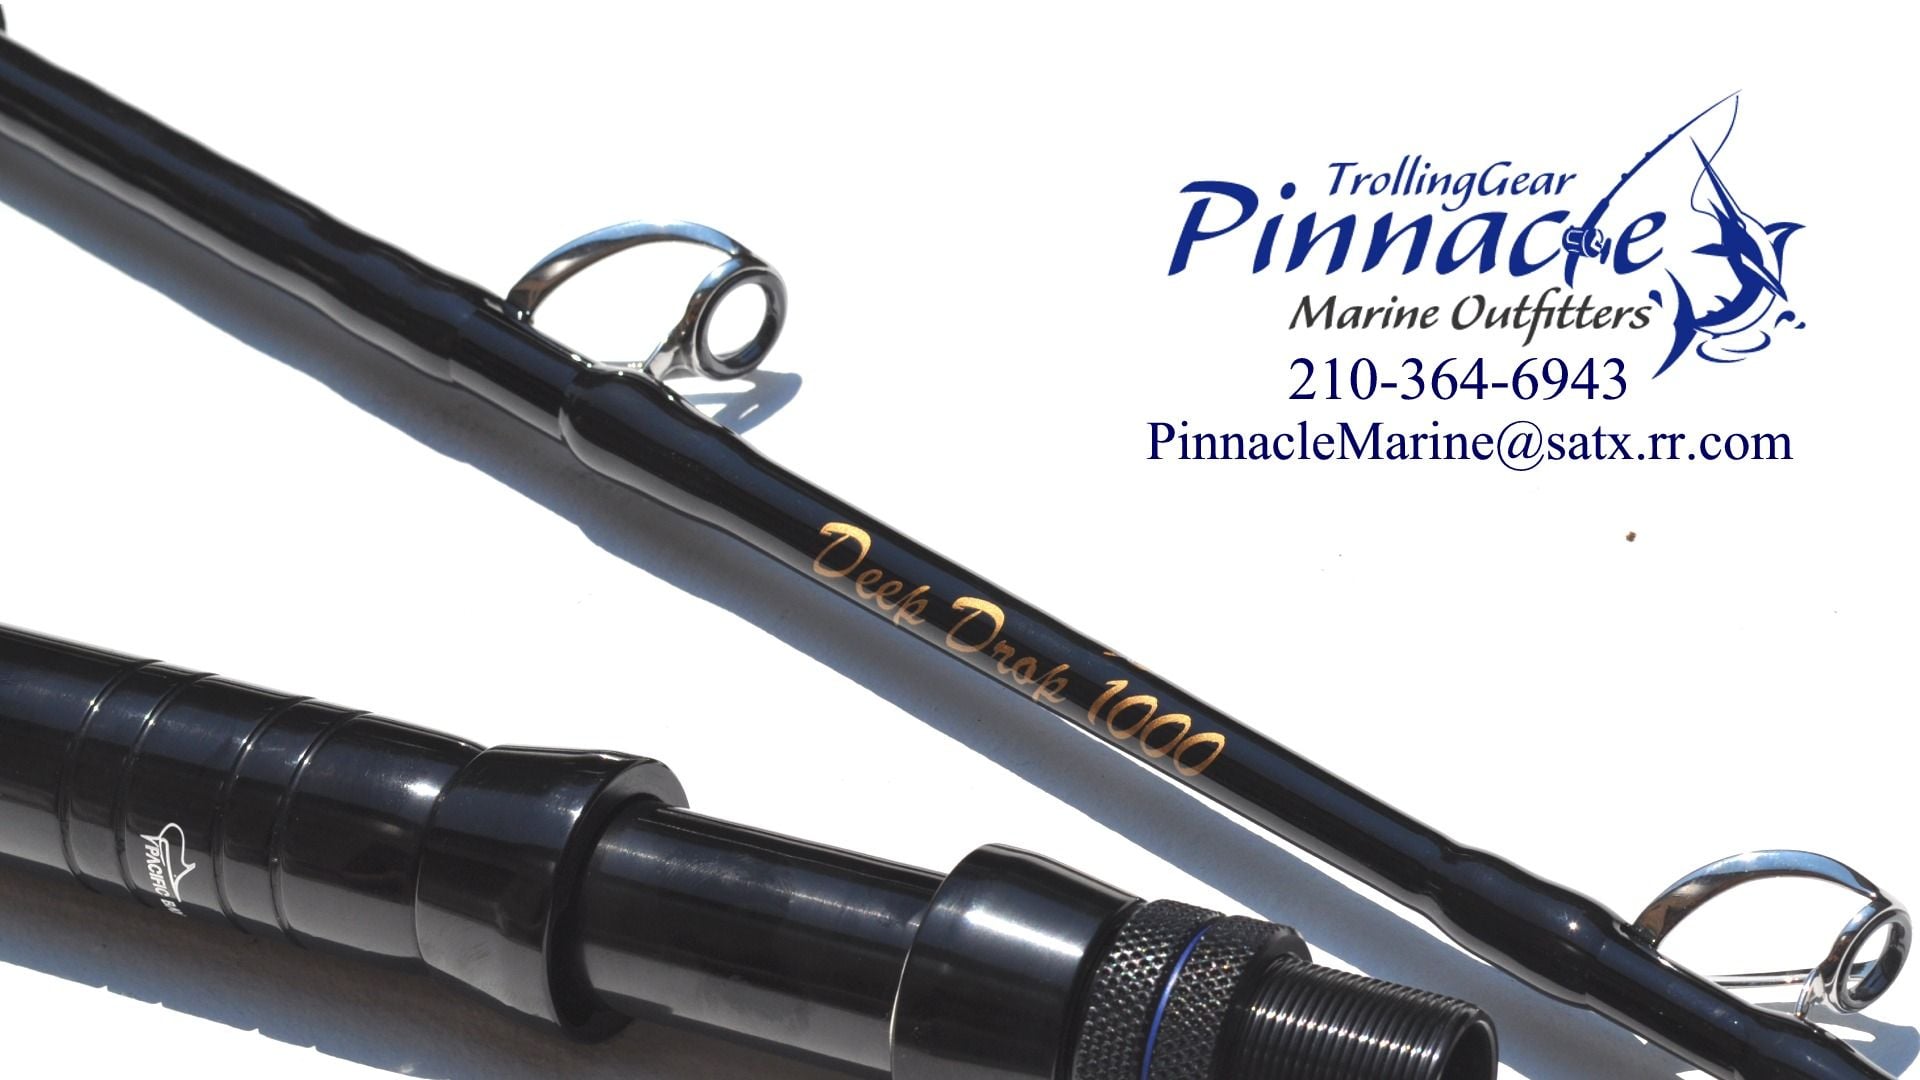 Pinnacle Marine Outfitters - Catalog - The Hull Truth - Boating and Fishing  Forum